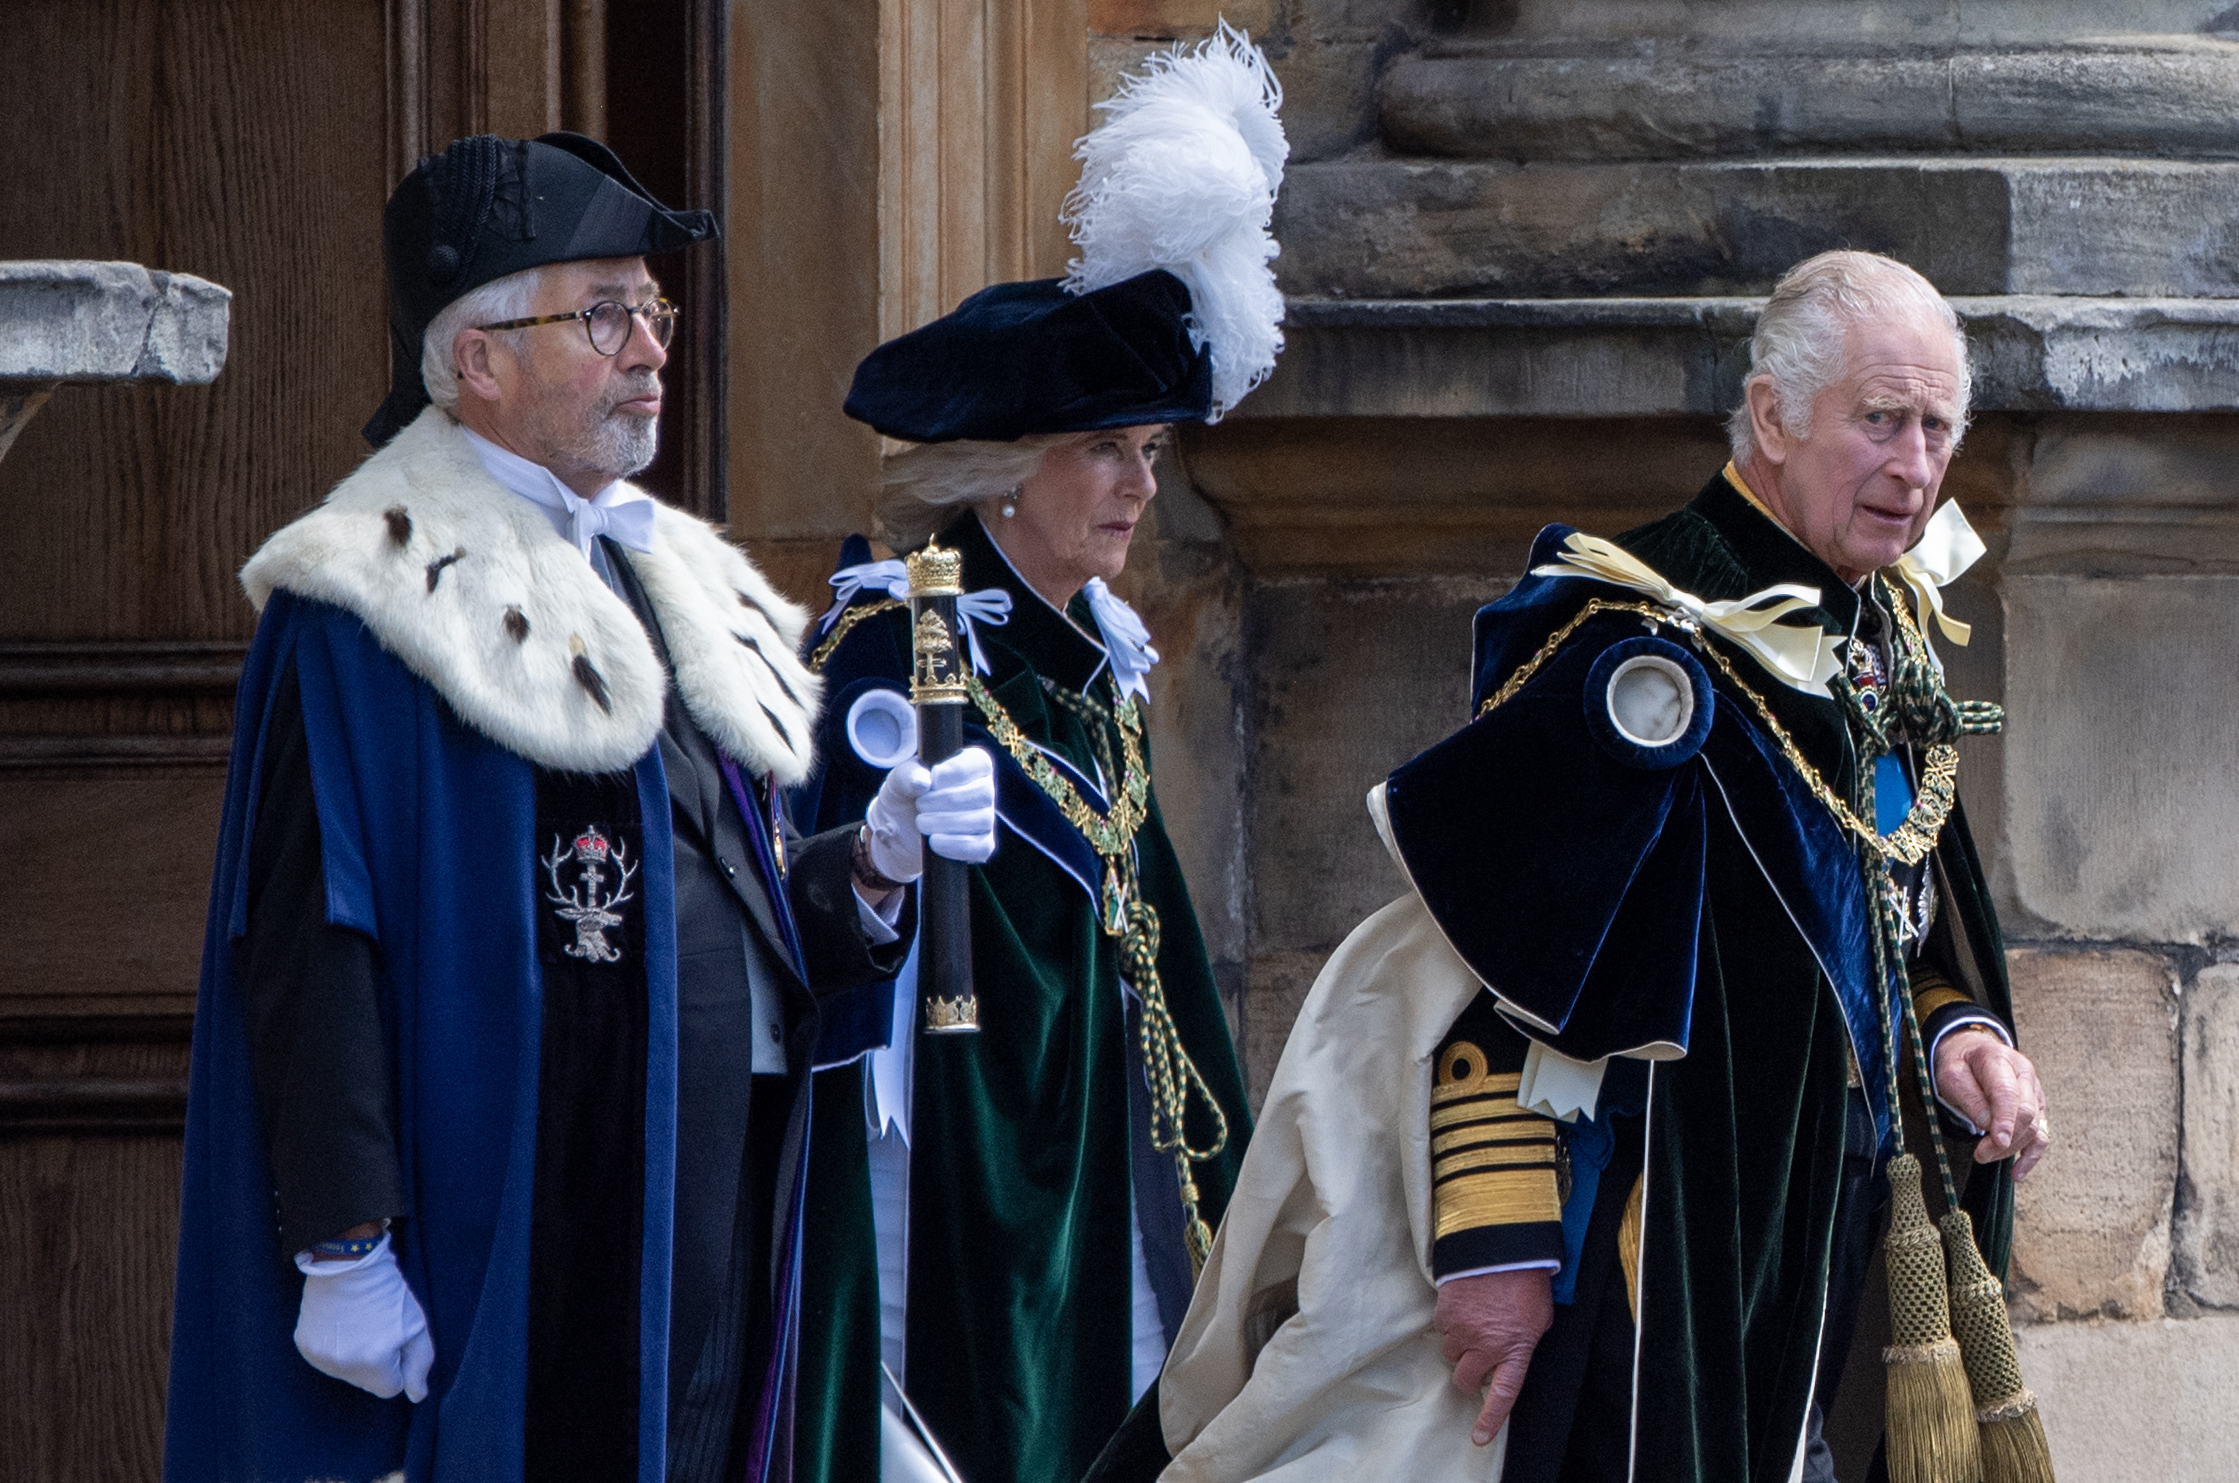 <p>King Charles III and Queen Camilla left the Palace of Holyroodhouse before traveling to St. Giles' Cathedral in Edinburgh, Scotland, to attend a National Service of Thanksgiving and Dedication on July 5, 2023. to mark the coronation of the new monarch in Scotland, where Charles was presented with the Honours of Scotland -- the Scottish crown jewels. </p>